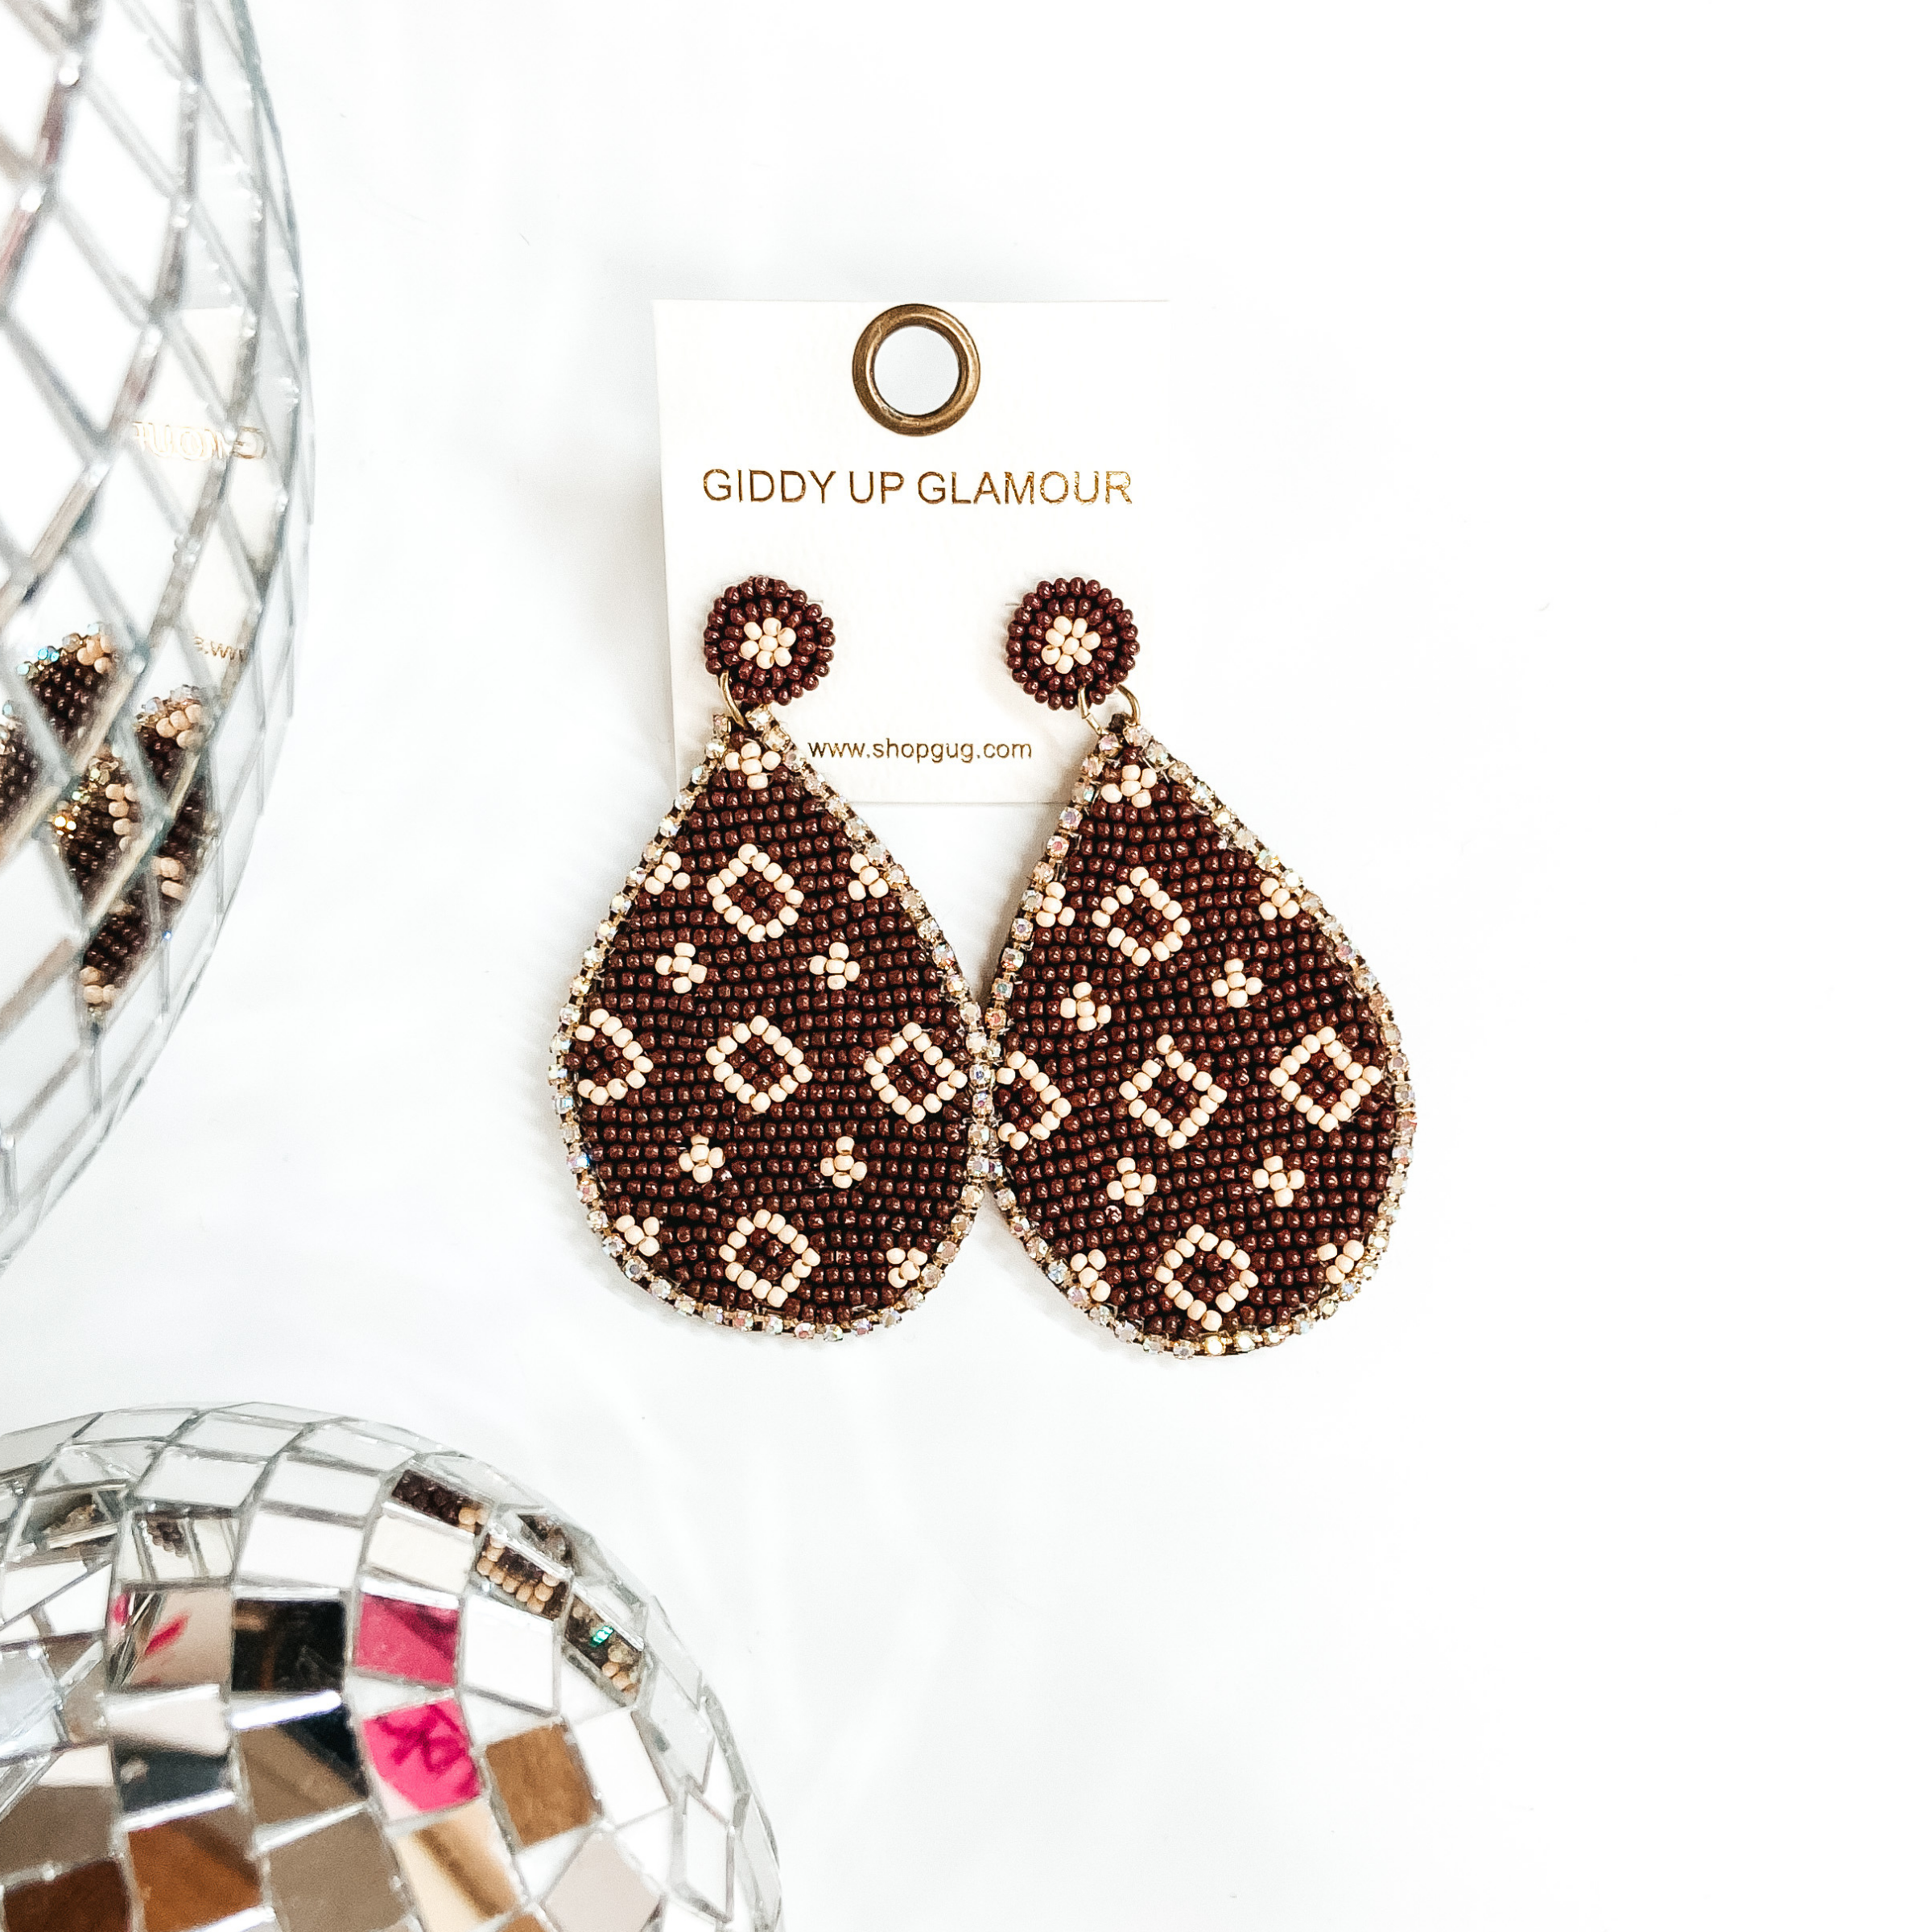 Designer Lifestyle Seedbead Teardrop Earrings in Brown - Giddy Up Glamour Boutique